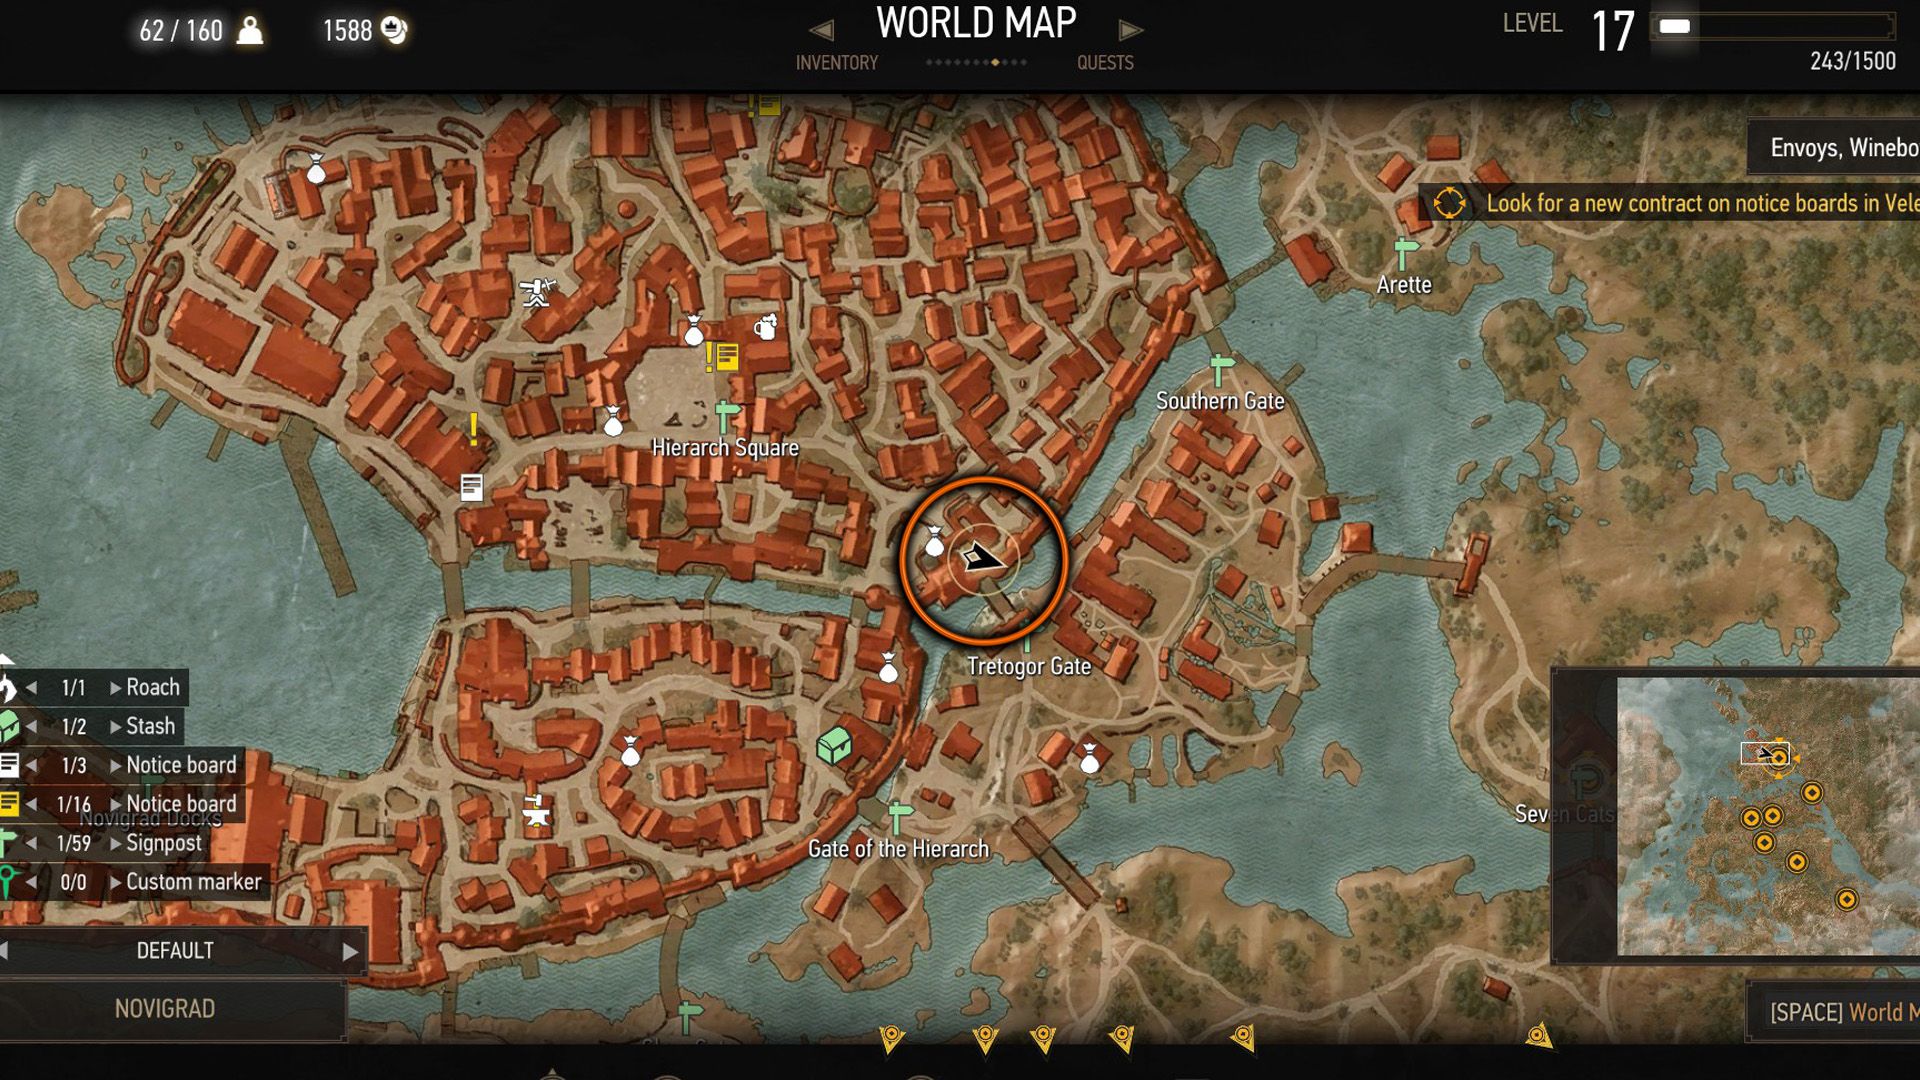 An annotated screenshot of The Witcher 3's map, showing where the player should enter the sewers.